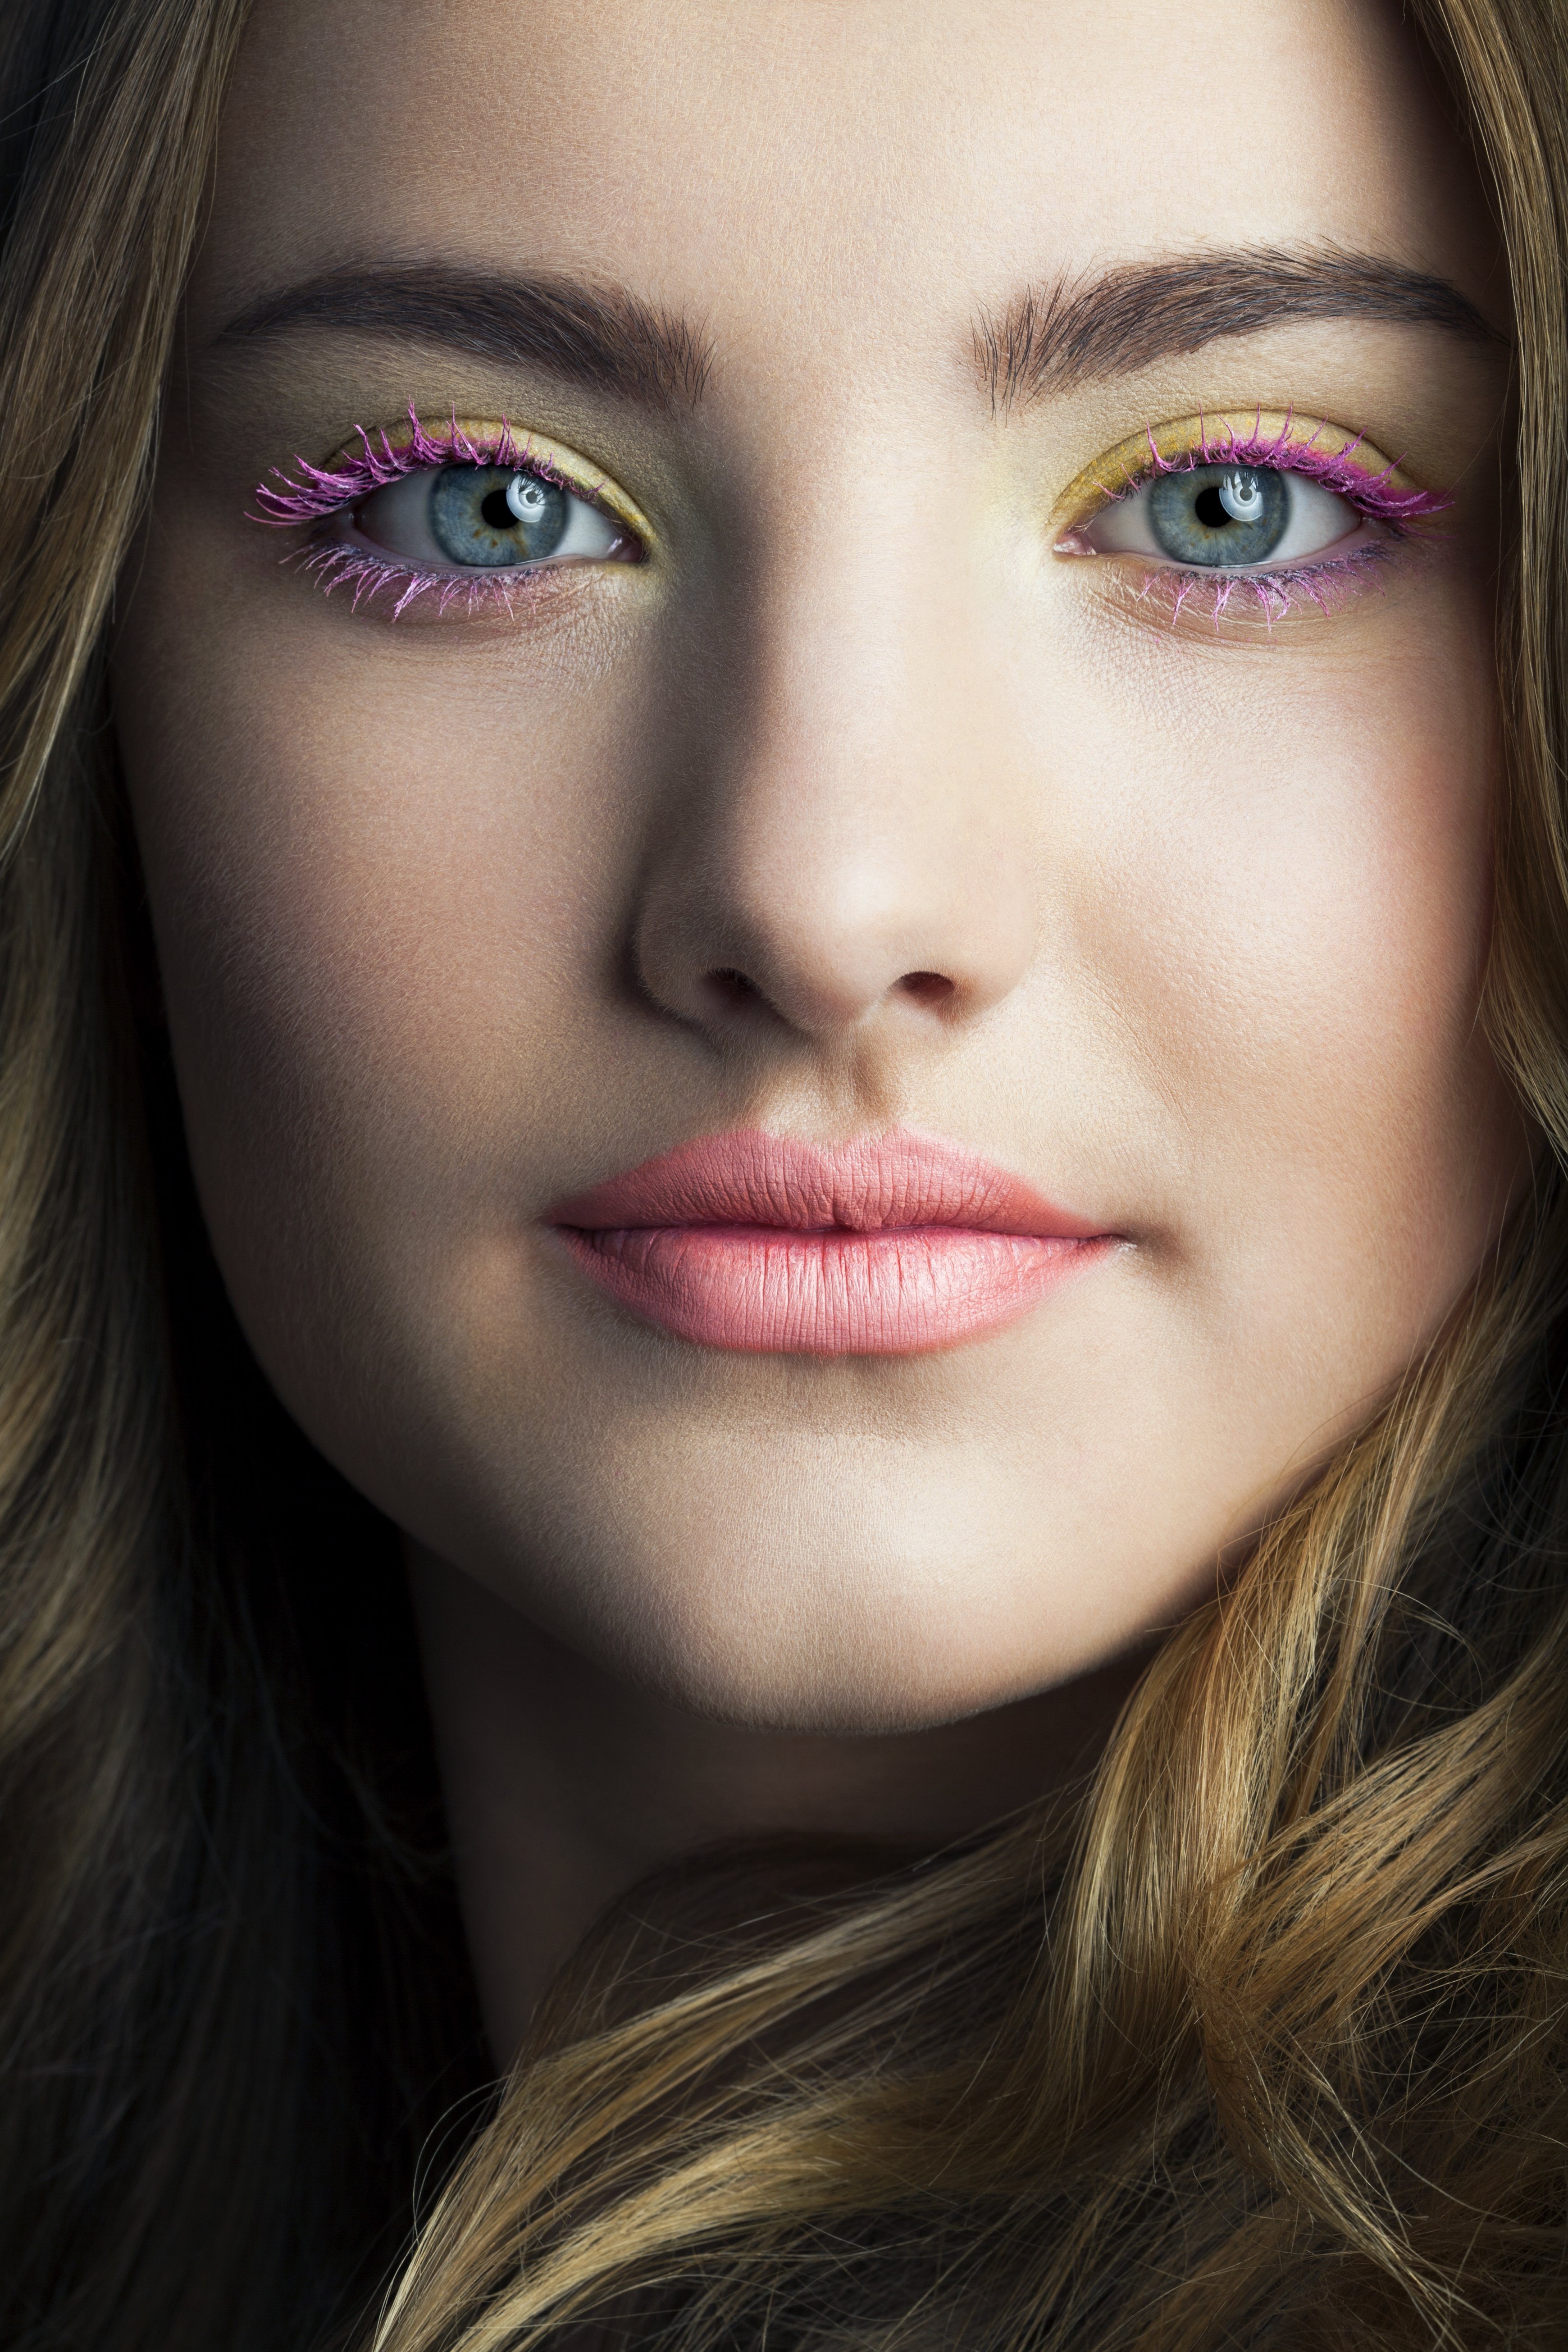 Woman with colorful eye makeup | Source: Getty Images